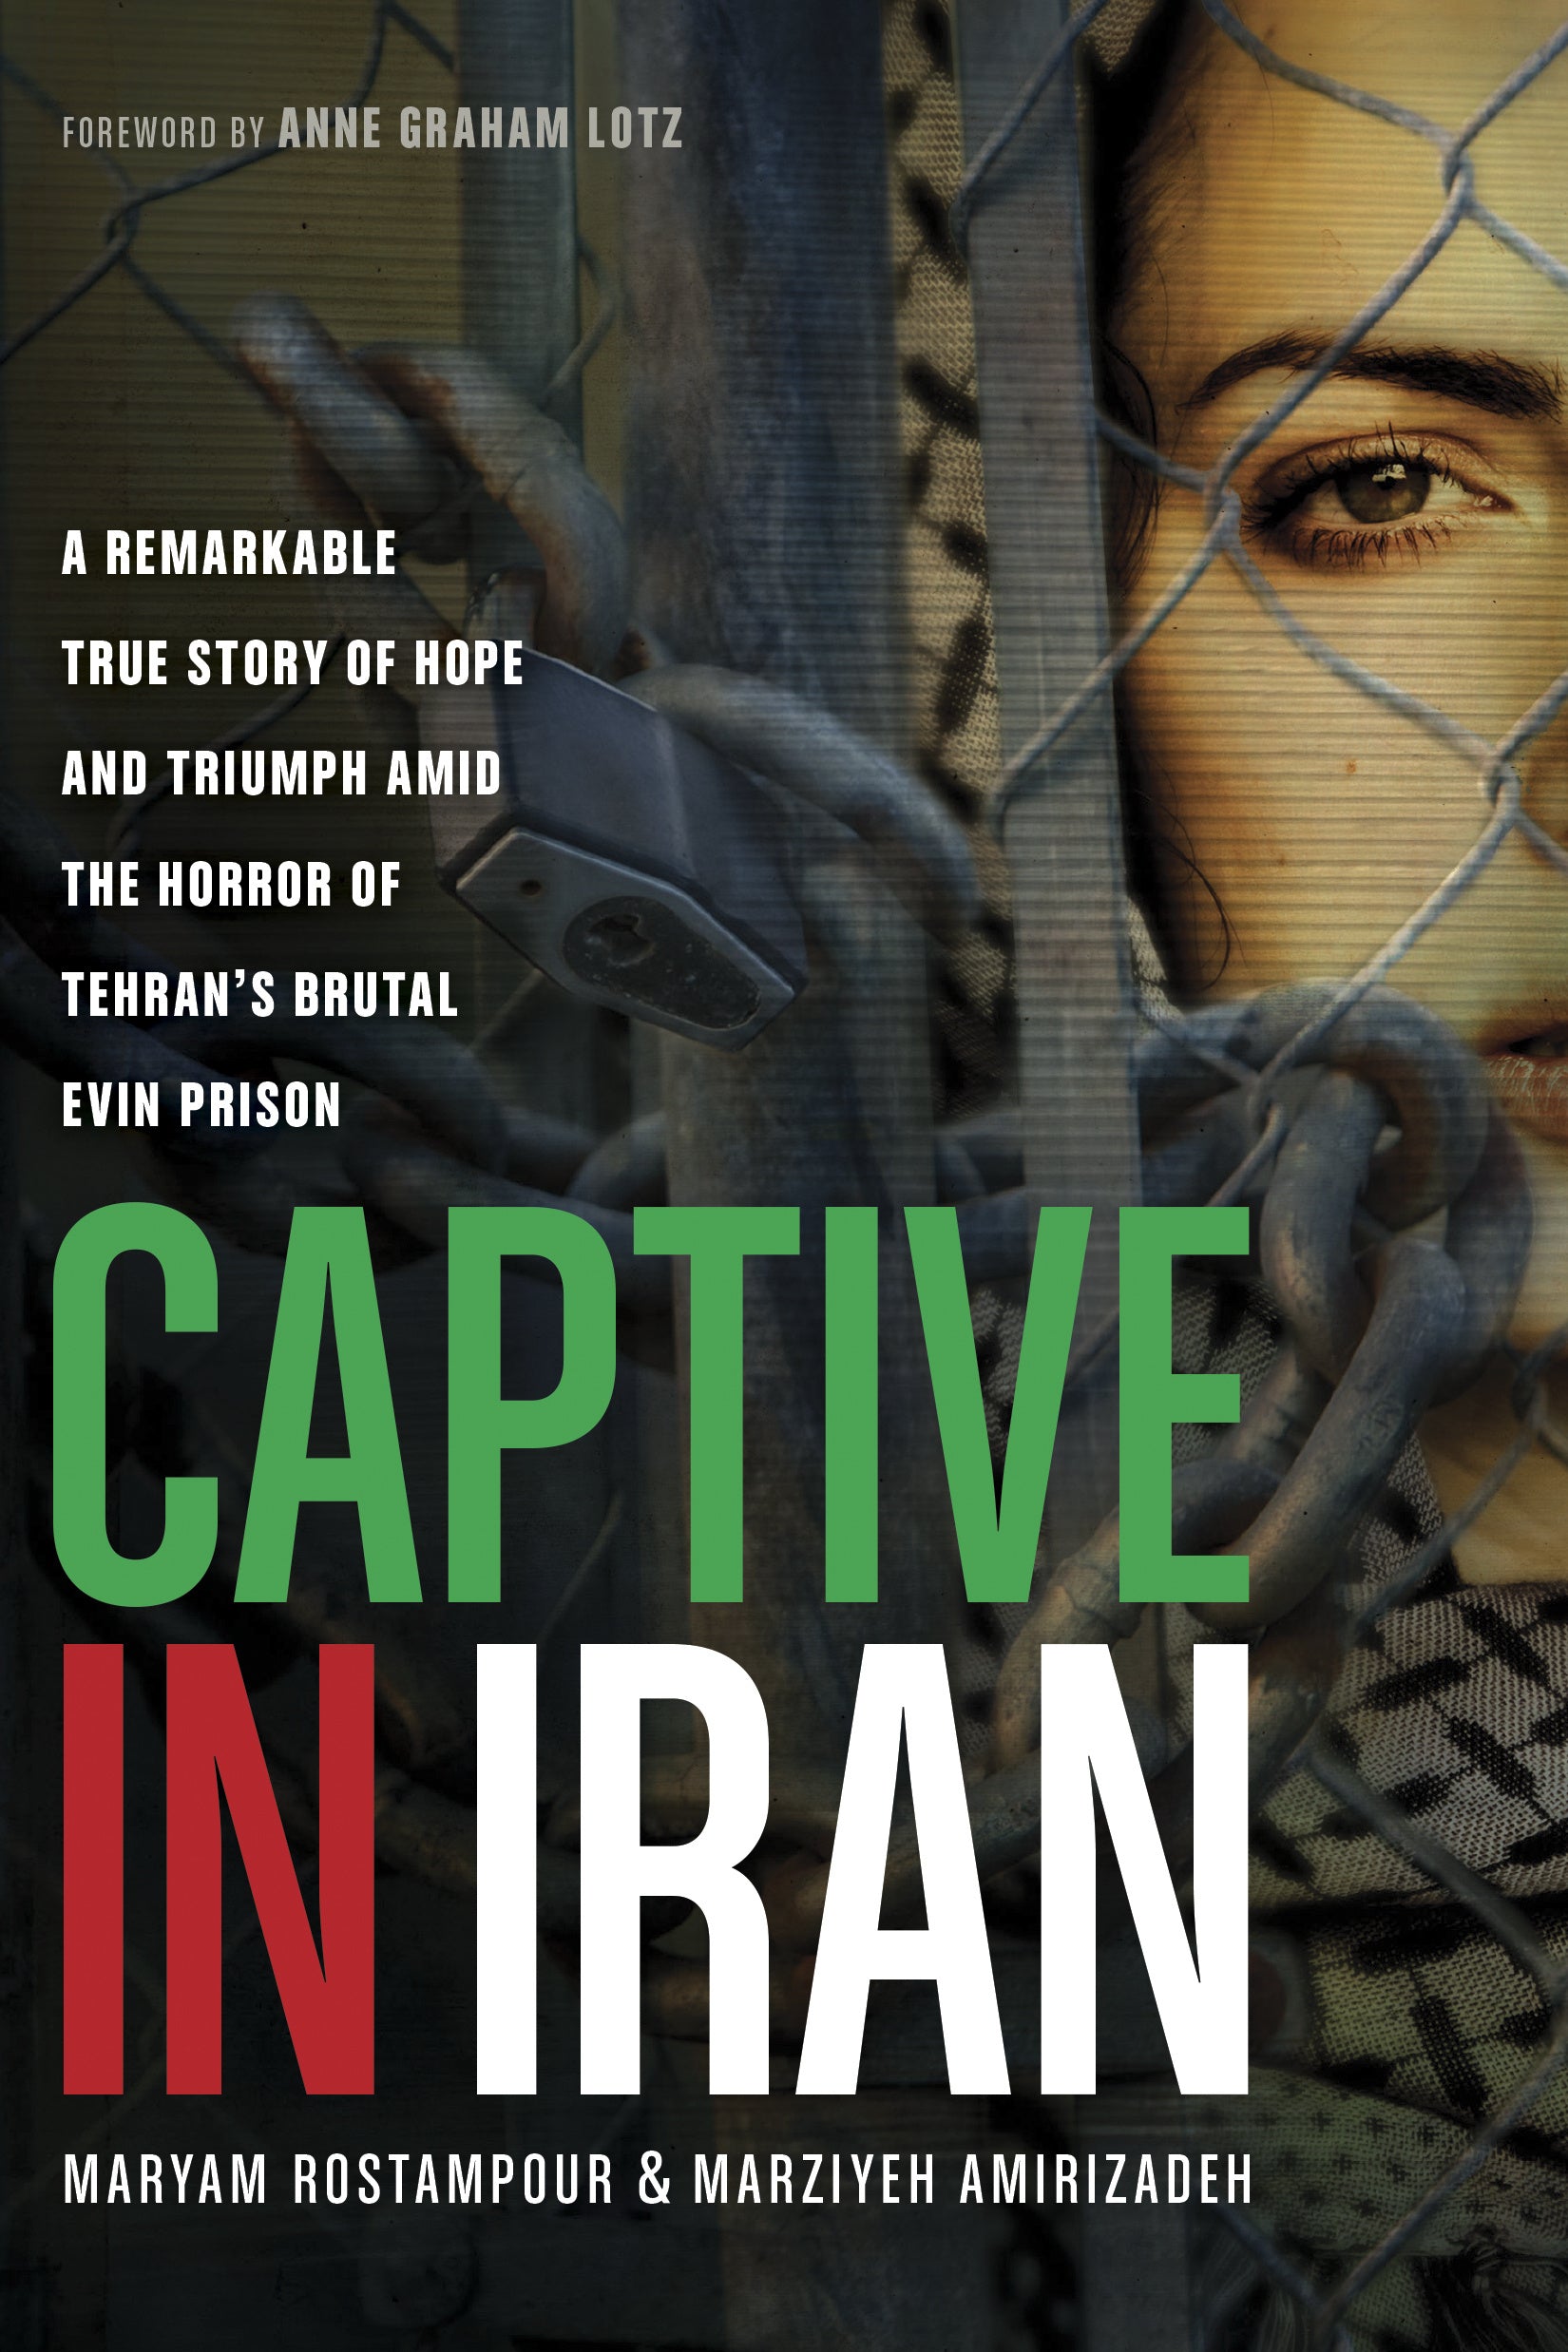 Image of Captive in Iran other